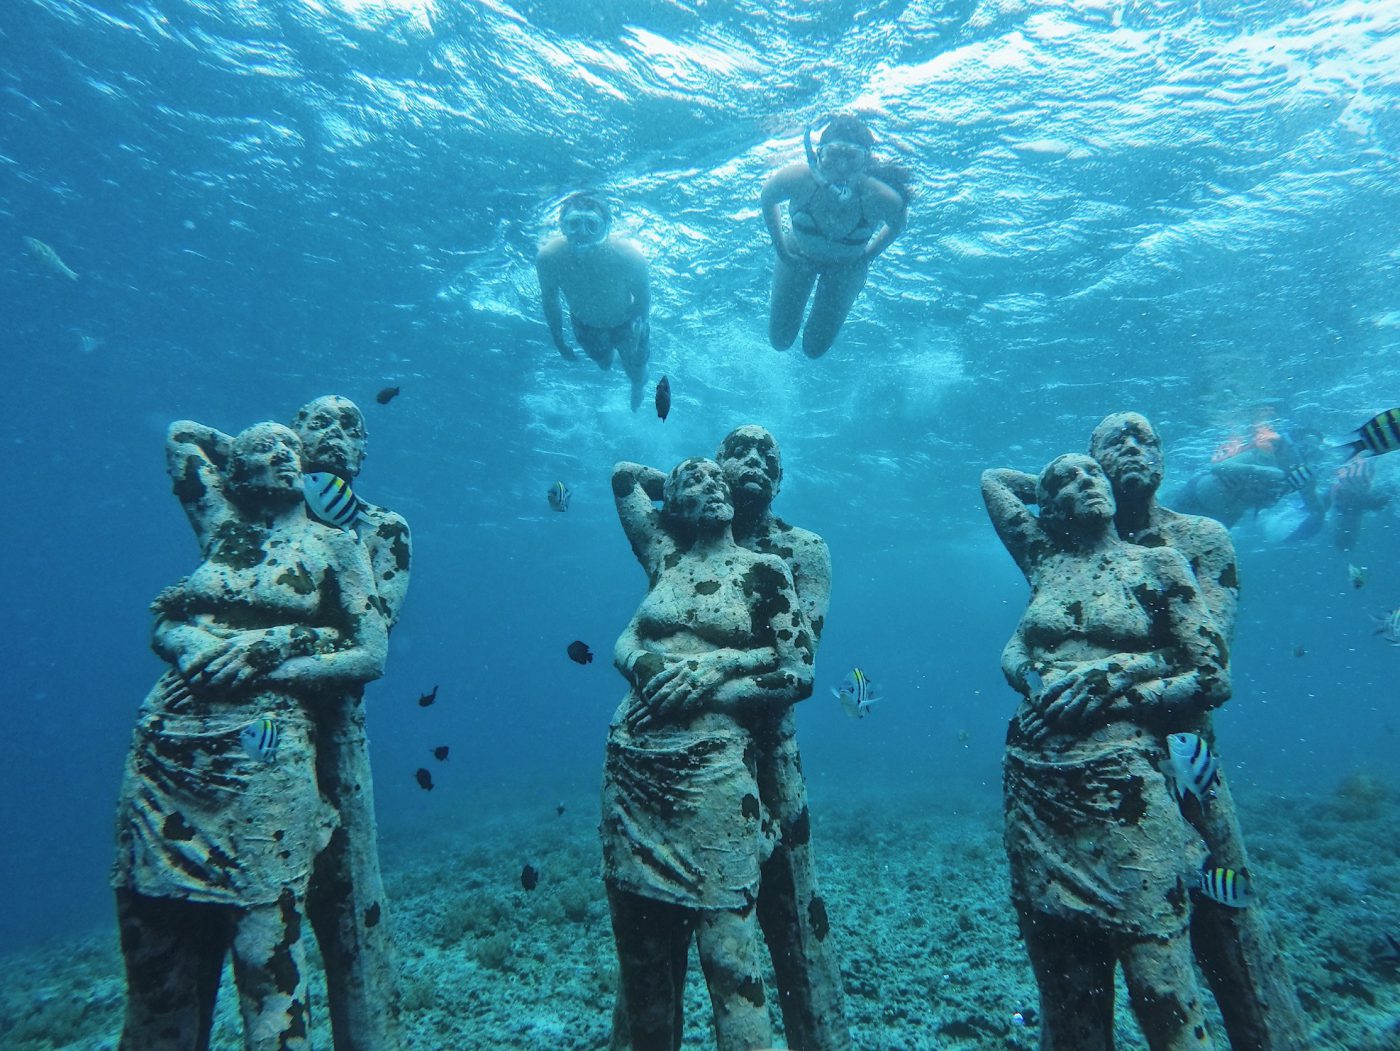 Gili Trawangan Underwater Sculpture by Jason deCaires Taylor off the shores of Gili Meno